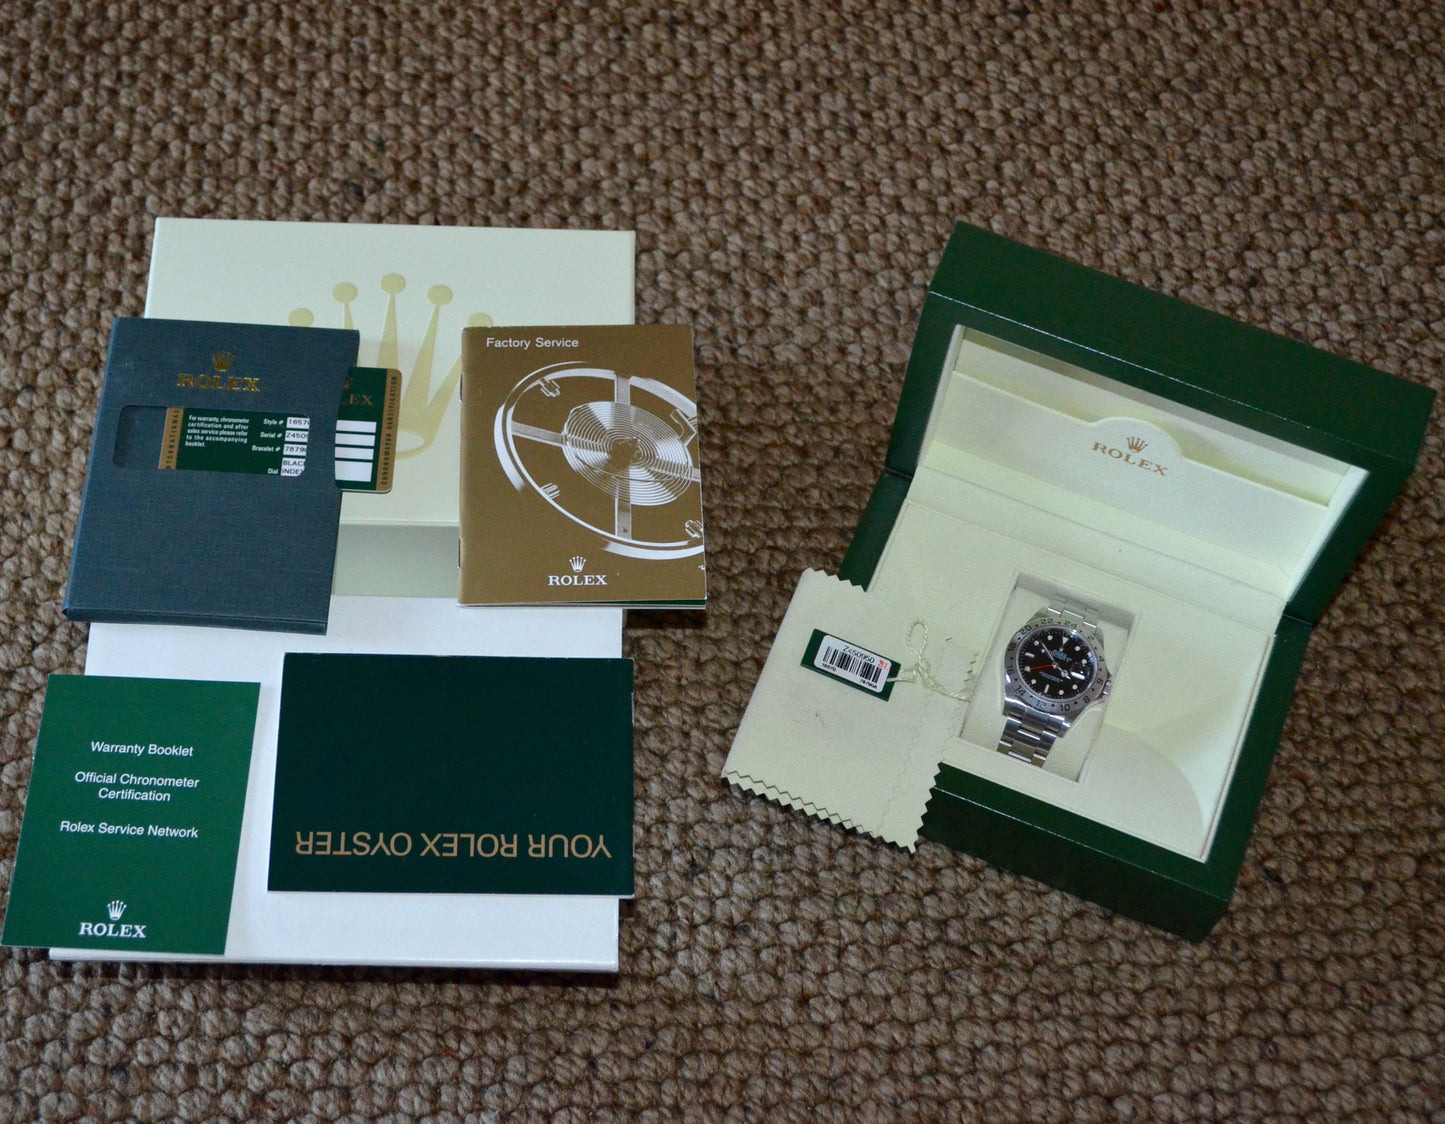 Rolex Explorer II Steel GMT 16570 Automatic Wristwatch "Z" Series Box Papers - Hashtag Watch Company